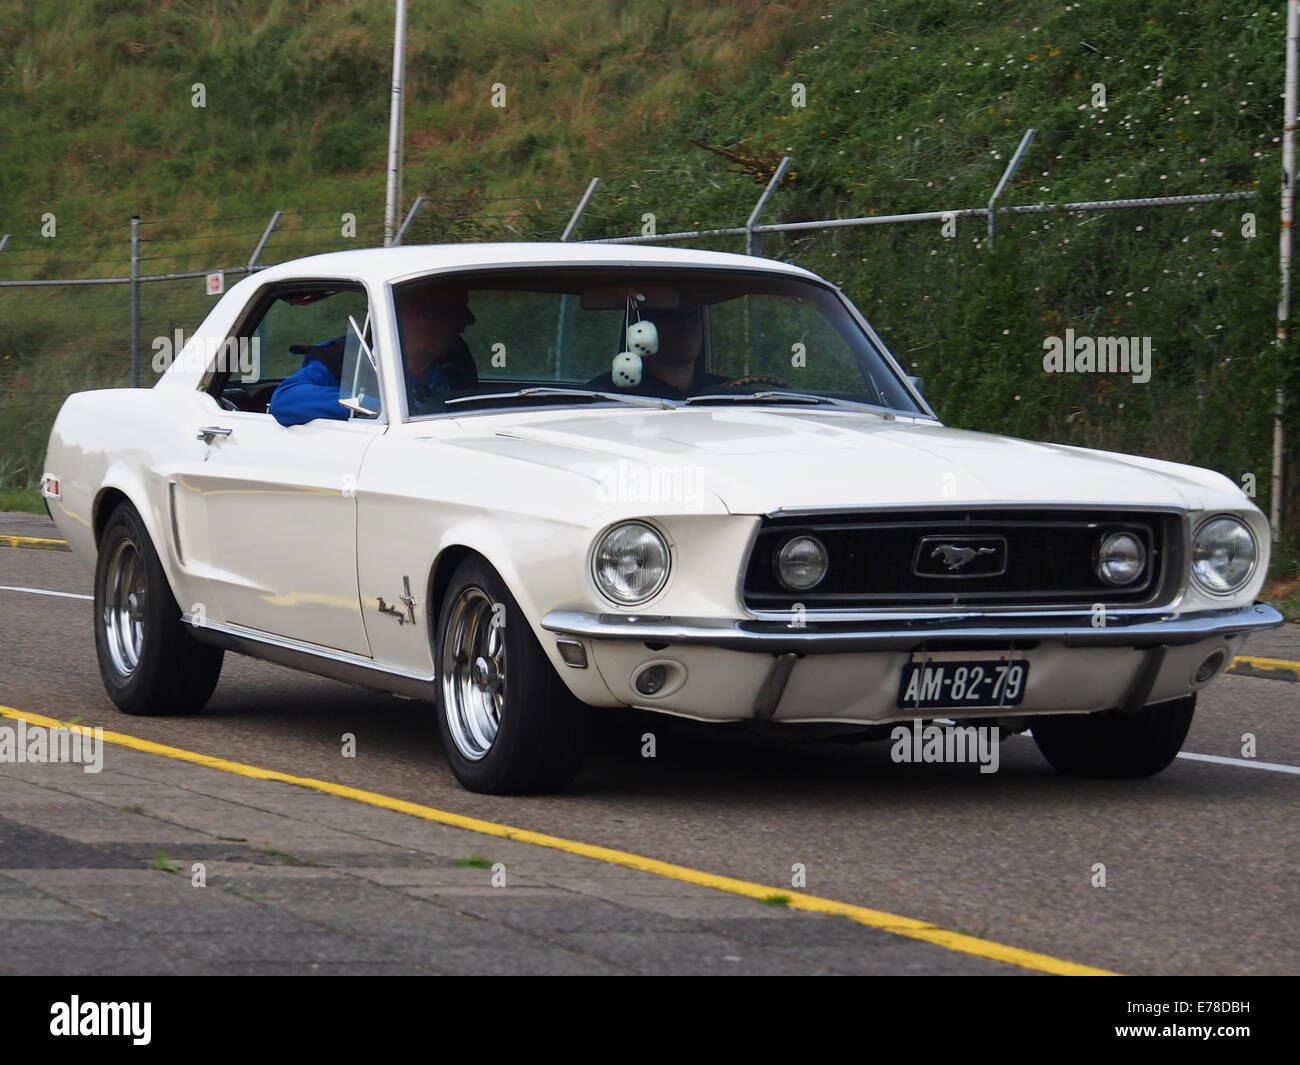 1968 Ford Mustang, licenza AM-82-79 pic1 Foto Stock